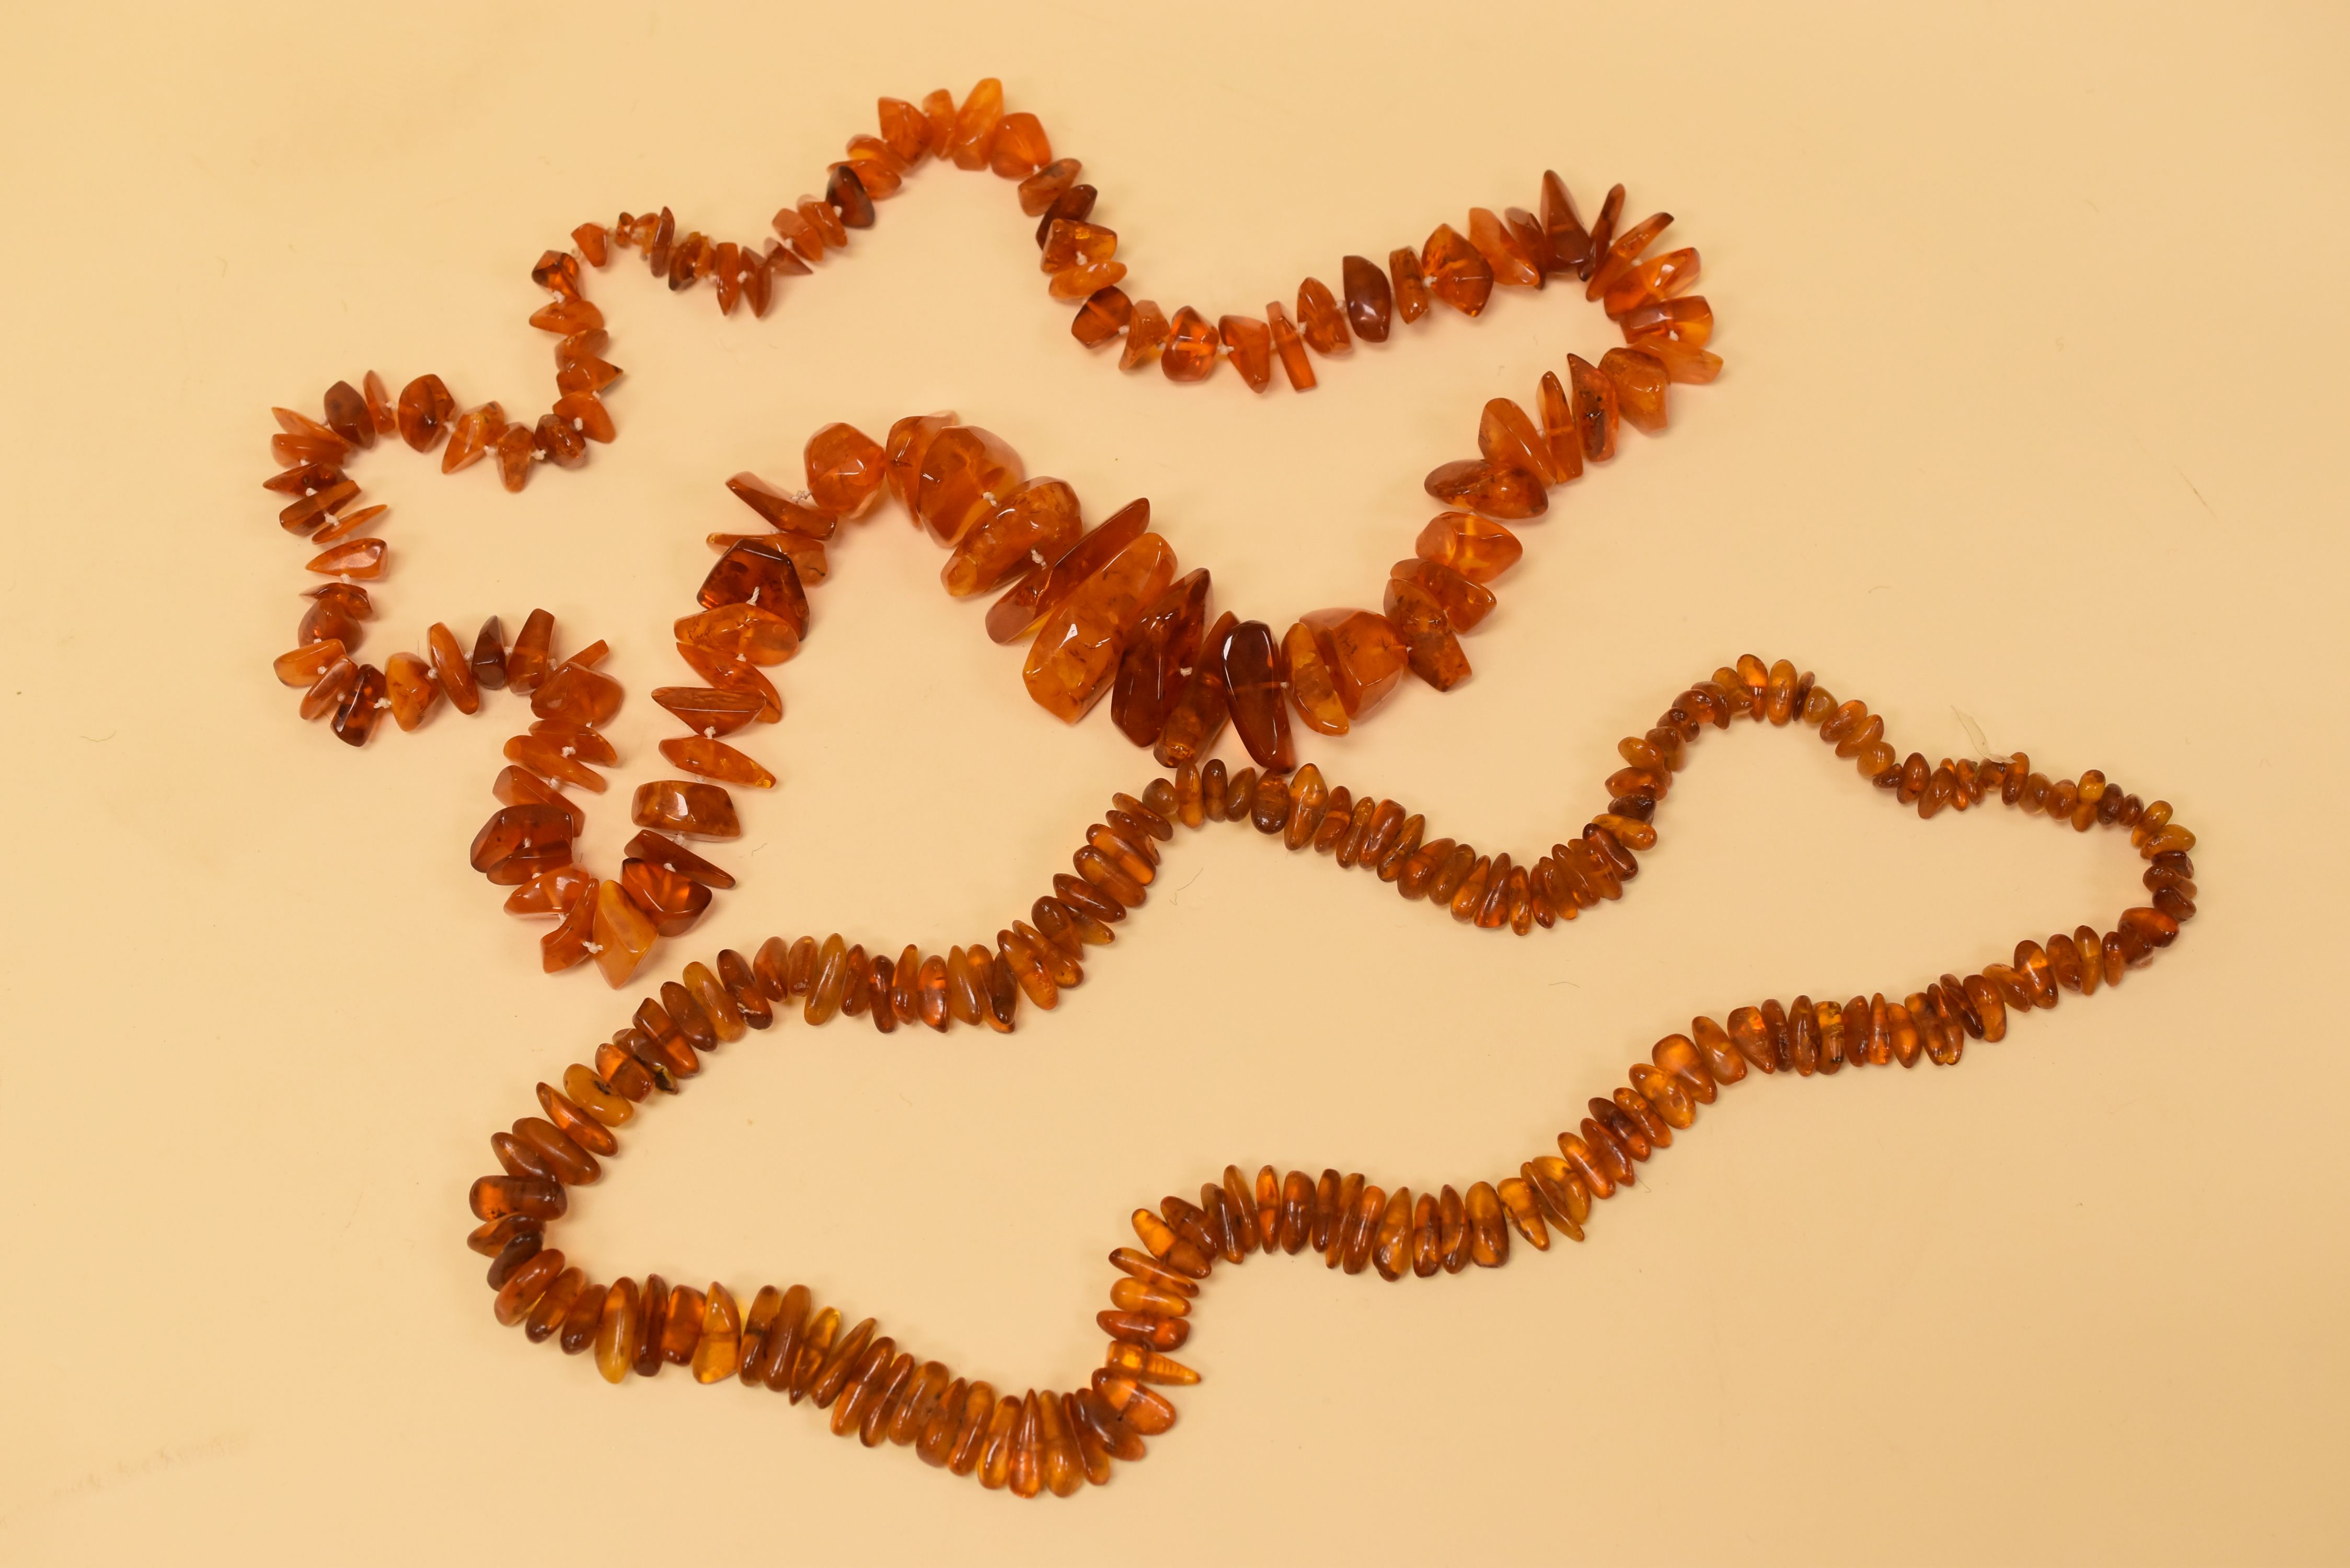 TWO STRINGS OF BALTIC AMBER BEADS, raw and unpolished, 74 and 64cms long